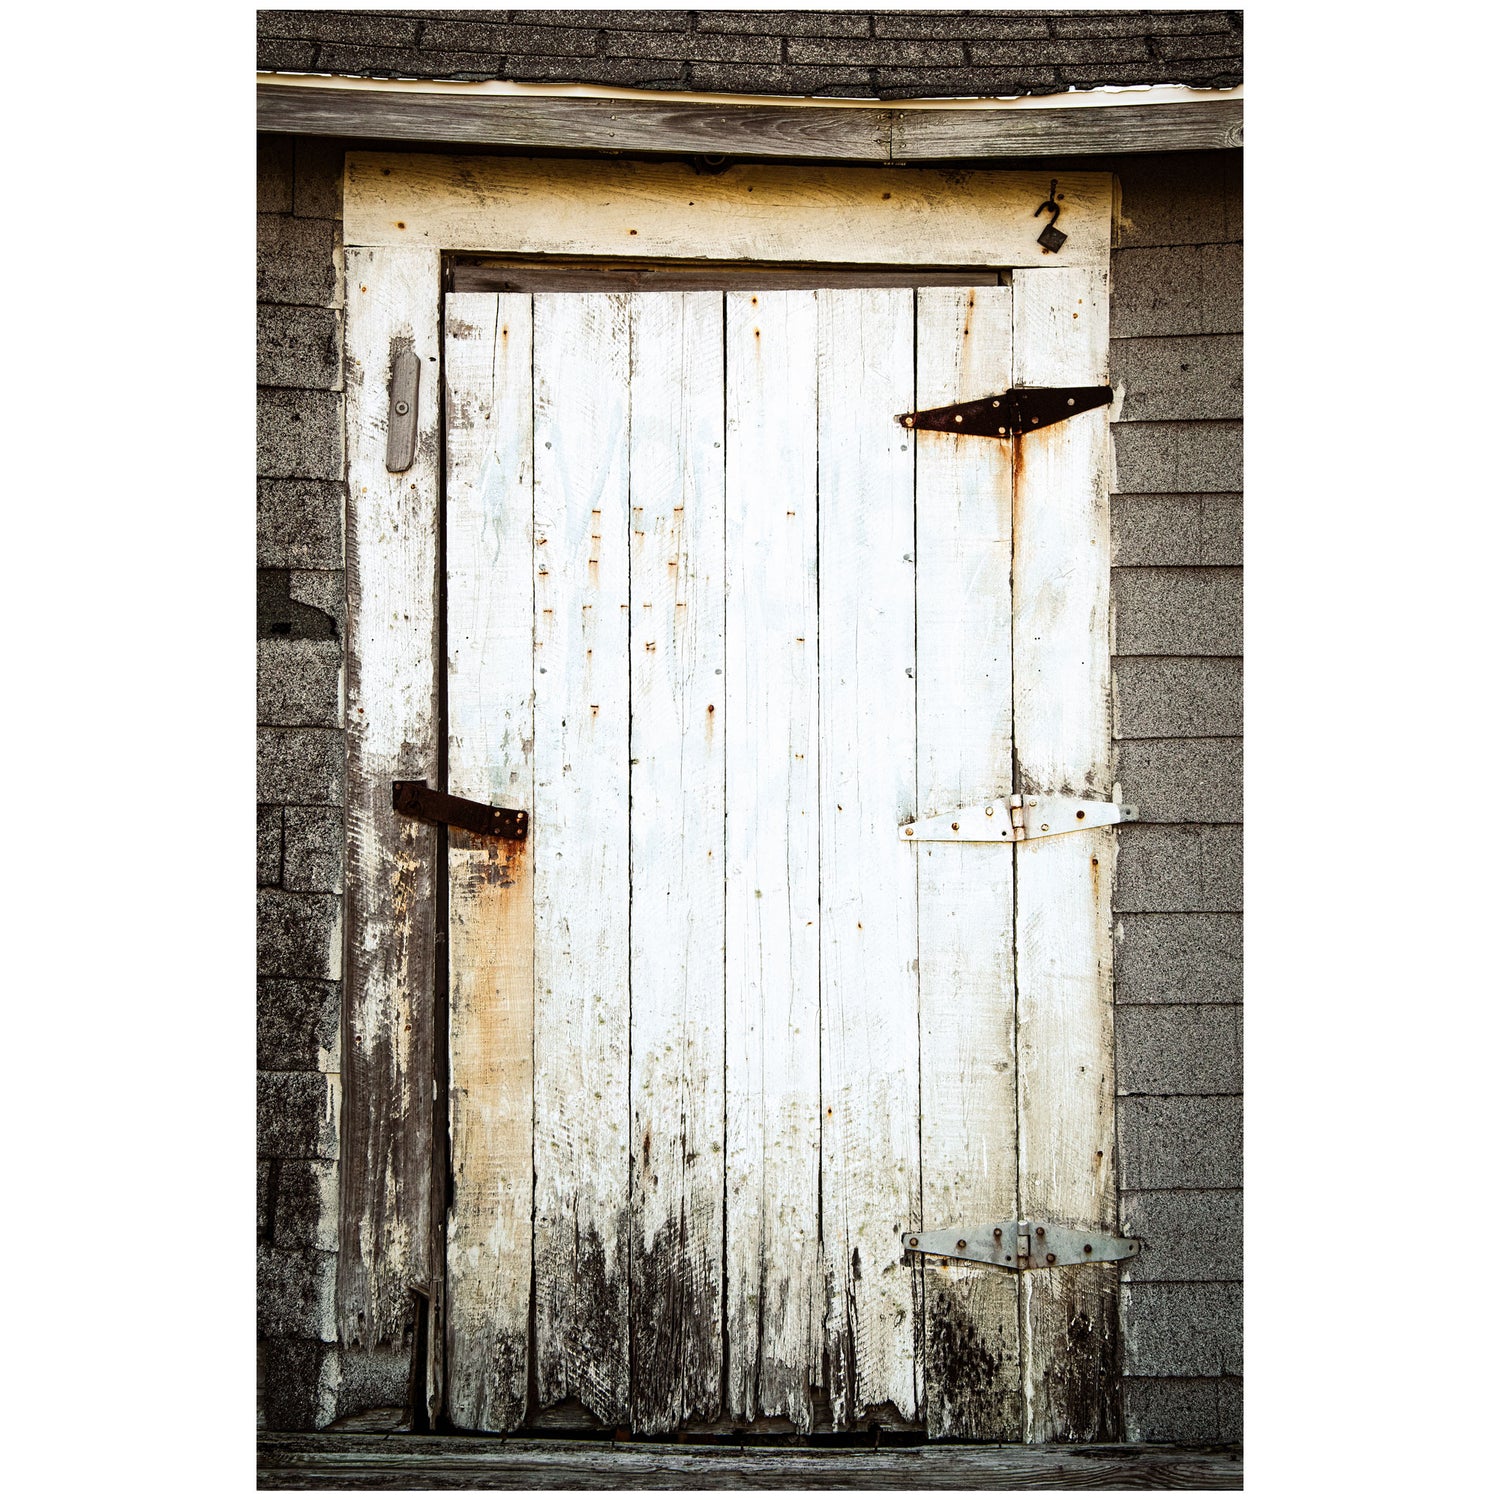 Timeless wall art capturing the allure of a rustic door, inviting you to a forgotten corner of history and adding a unique and thought-provoking element to your environment.